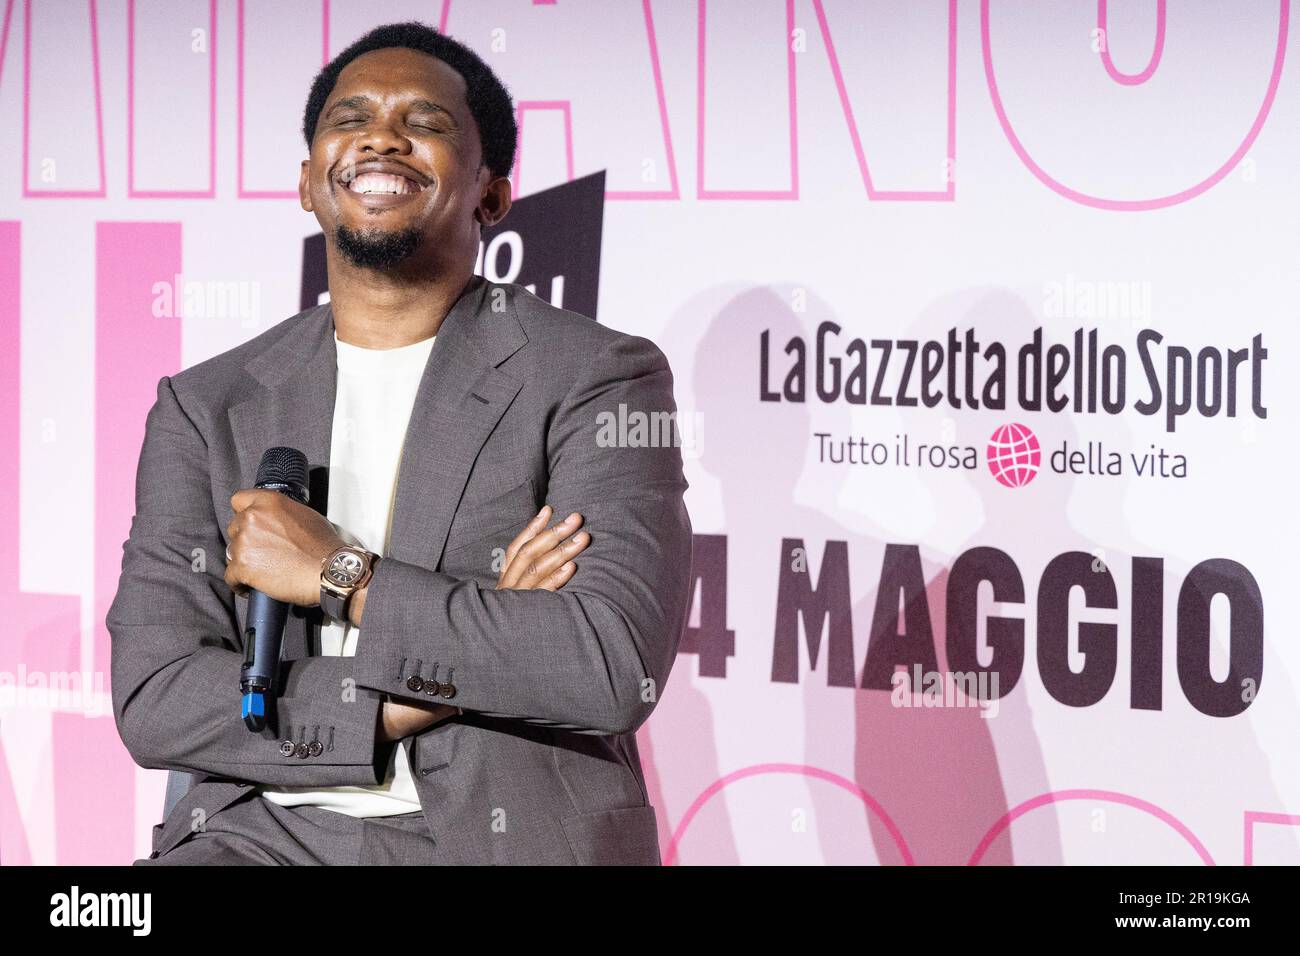 Milan, Italy - May 12 2023 - Samuel Eto'o guest in a talk show at Milano football week hosted by La Gazzetta dello Sport Credit: Kines Milano/Alamy Live News Stock Photo